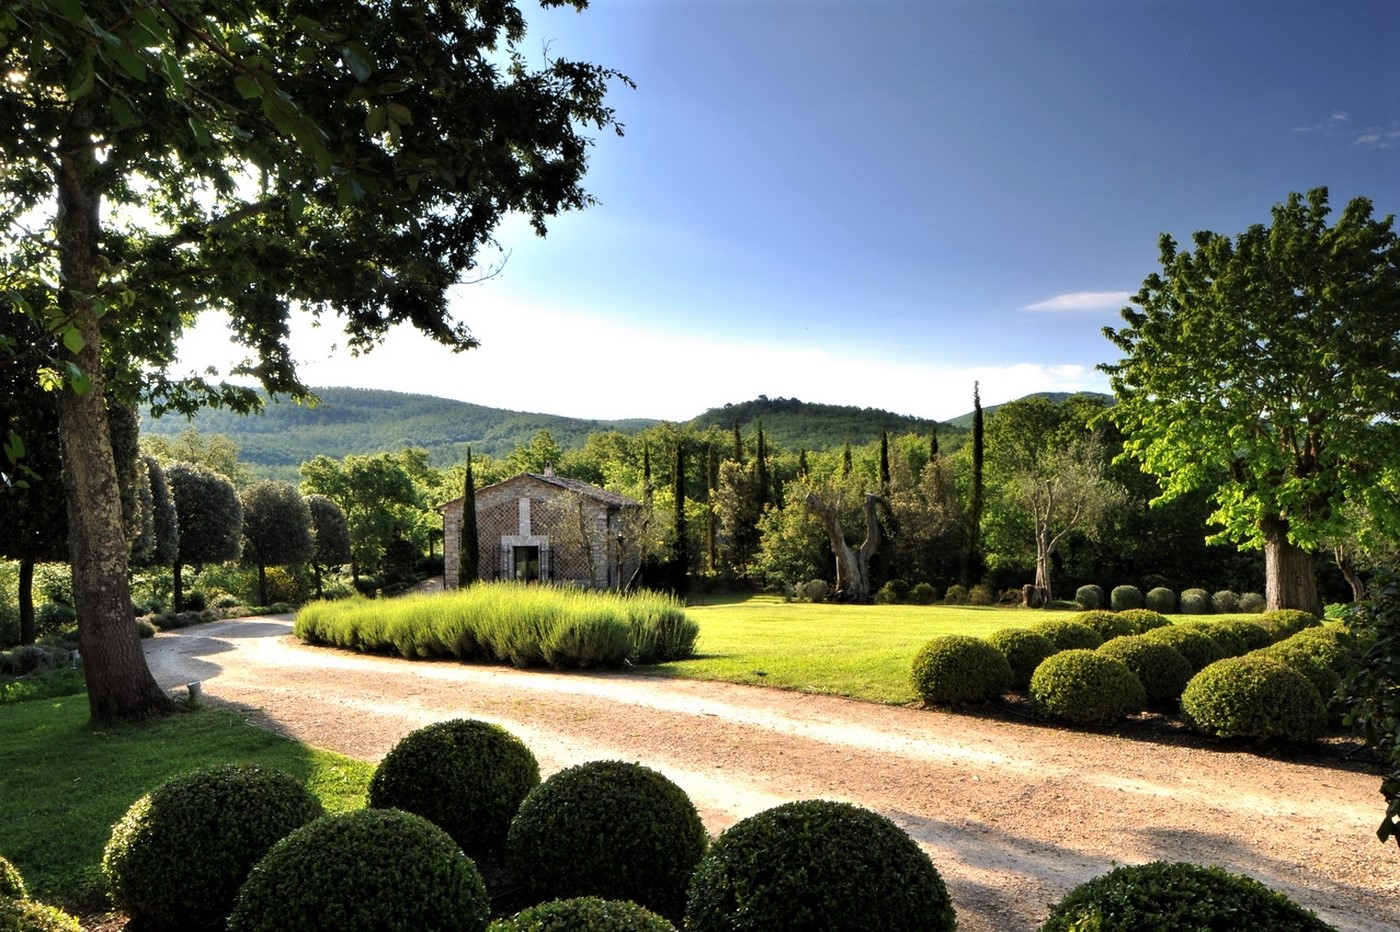 Driveway and garden of Villa Arrighi in Umbria